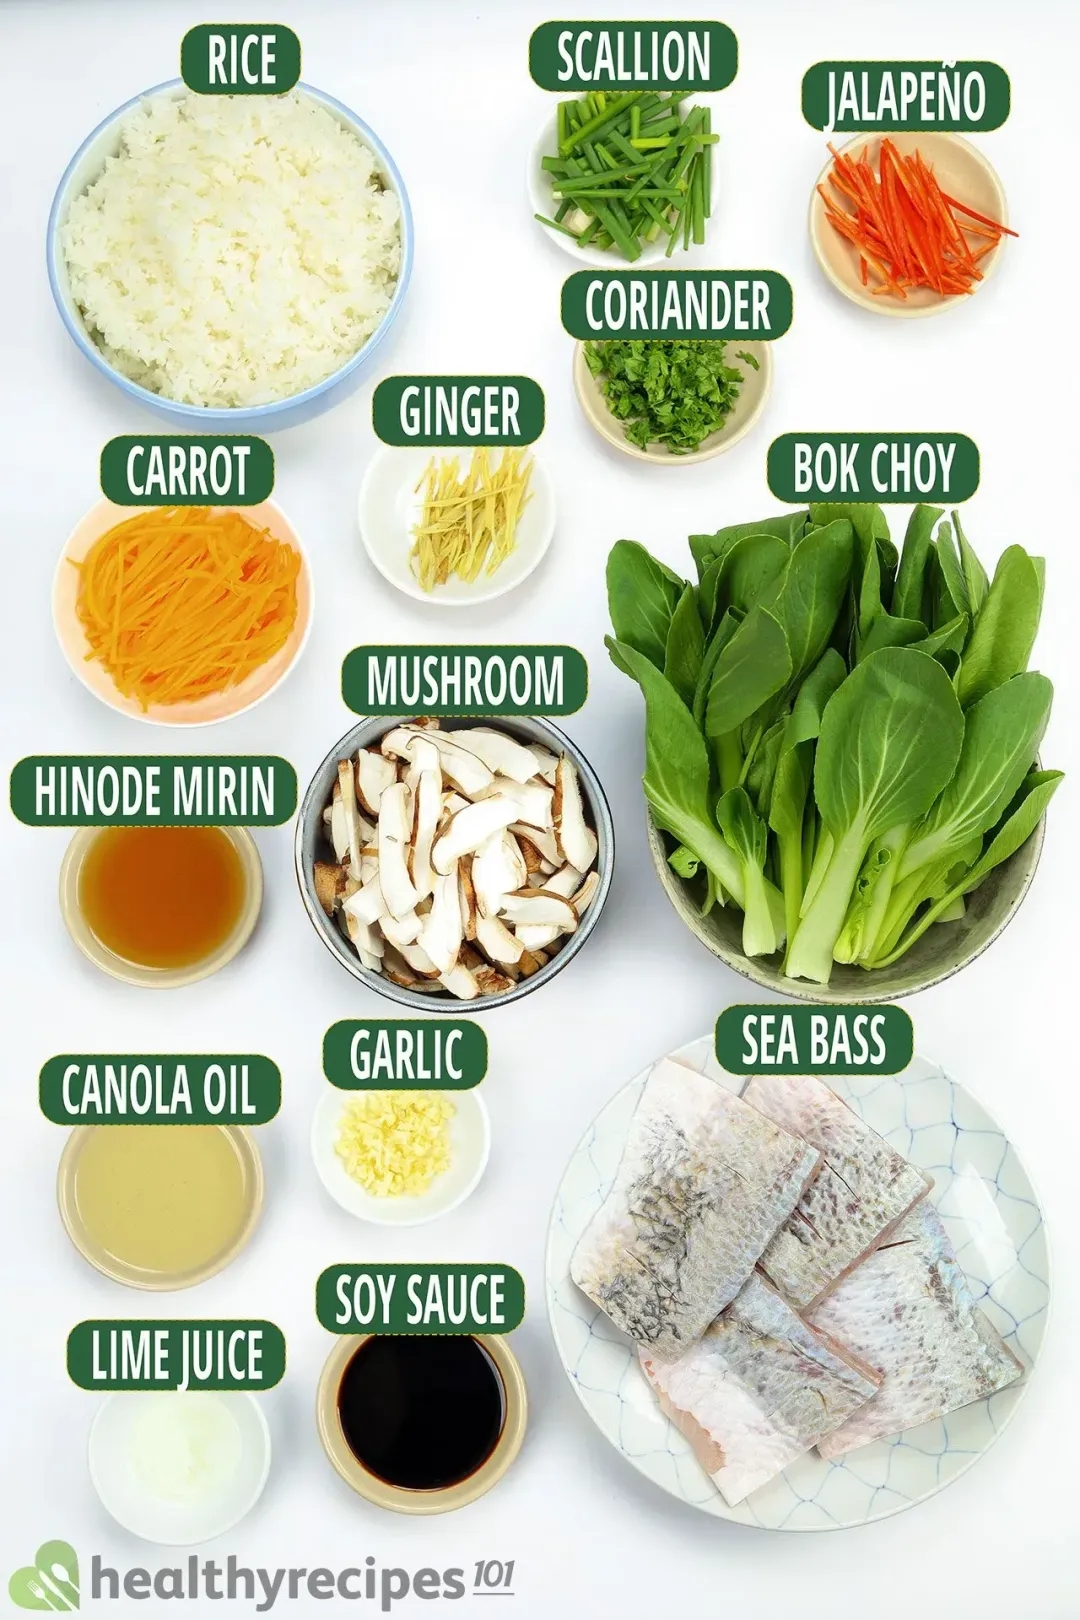 Ingredients for Chinese Steamed Sea Bass